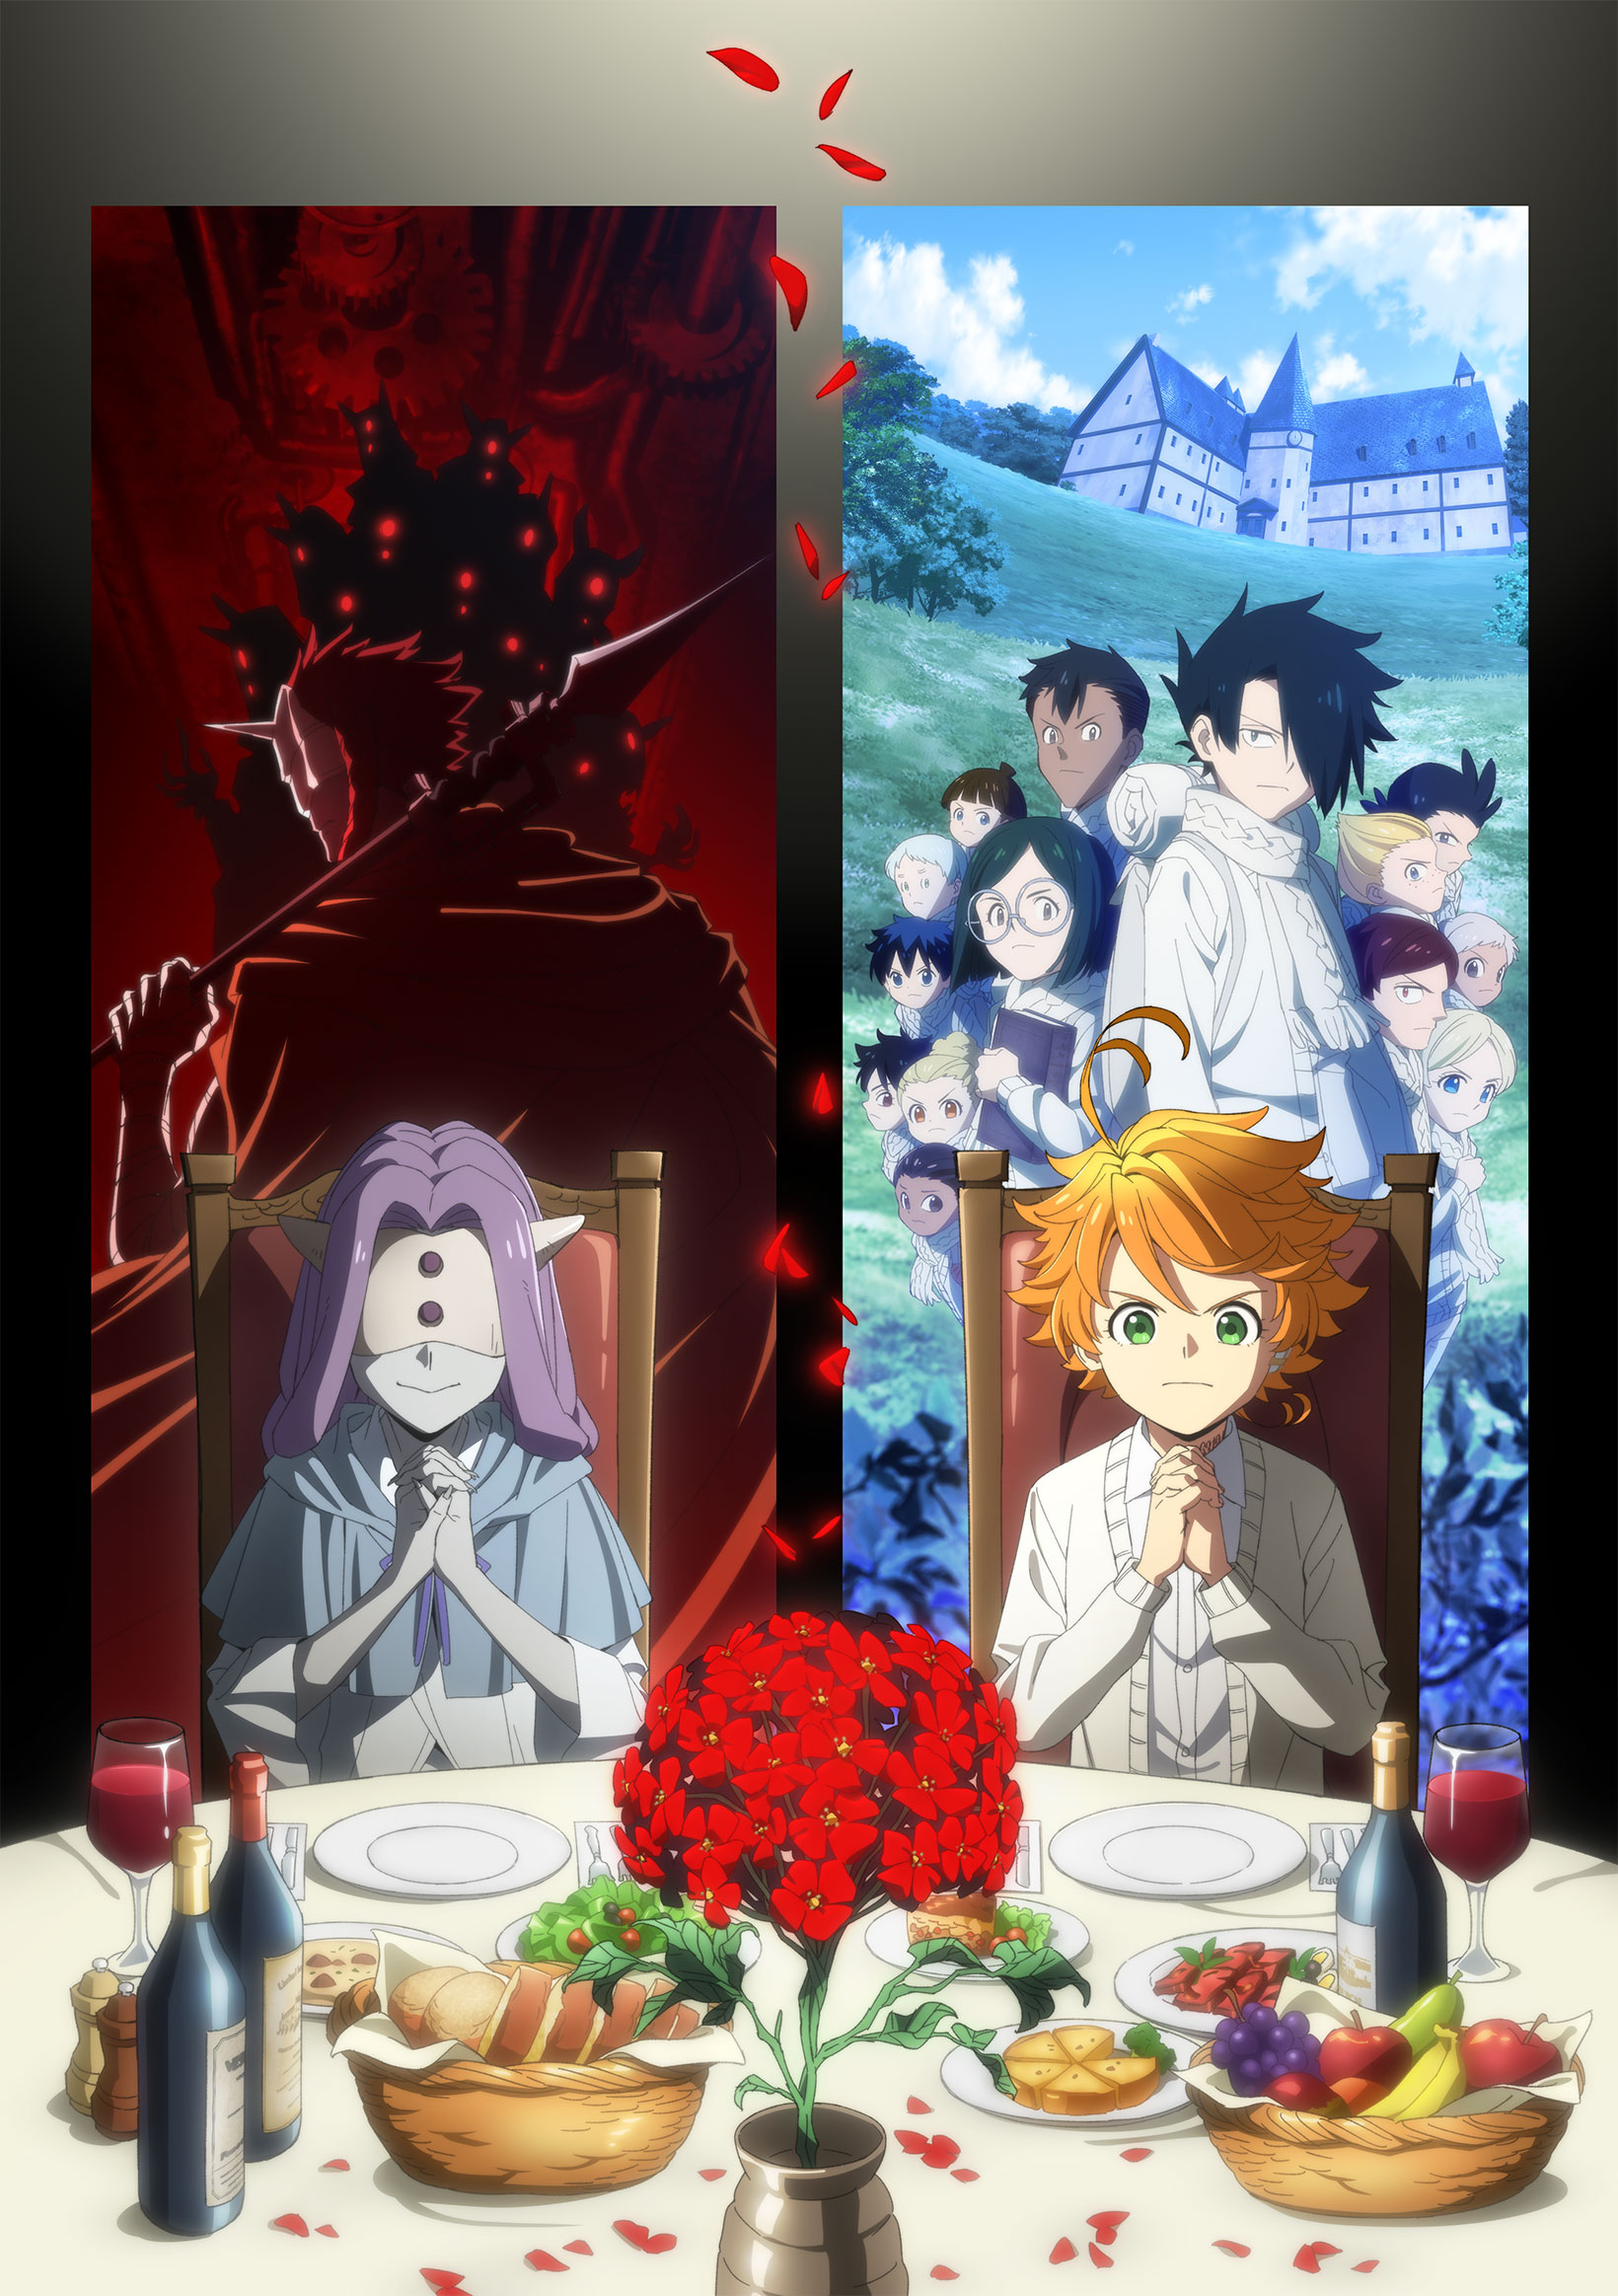 New THE PROMISED NEVERLAND Season 2 TV Anime Visual Contrasts Demons - Will There Be A Season 2 Of The Promised Neverland